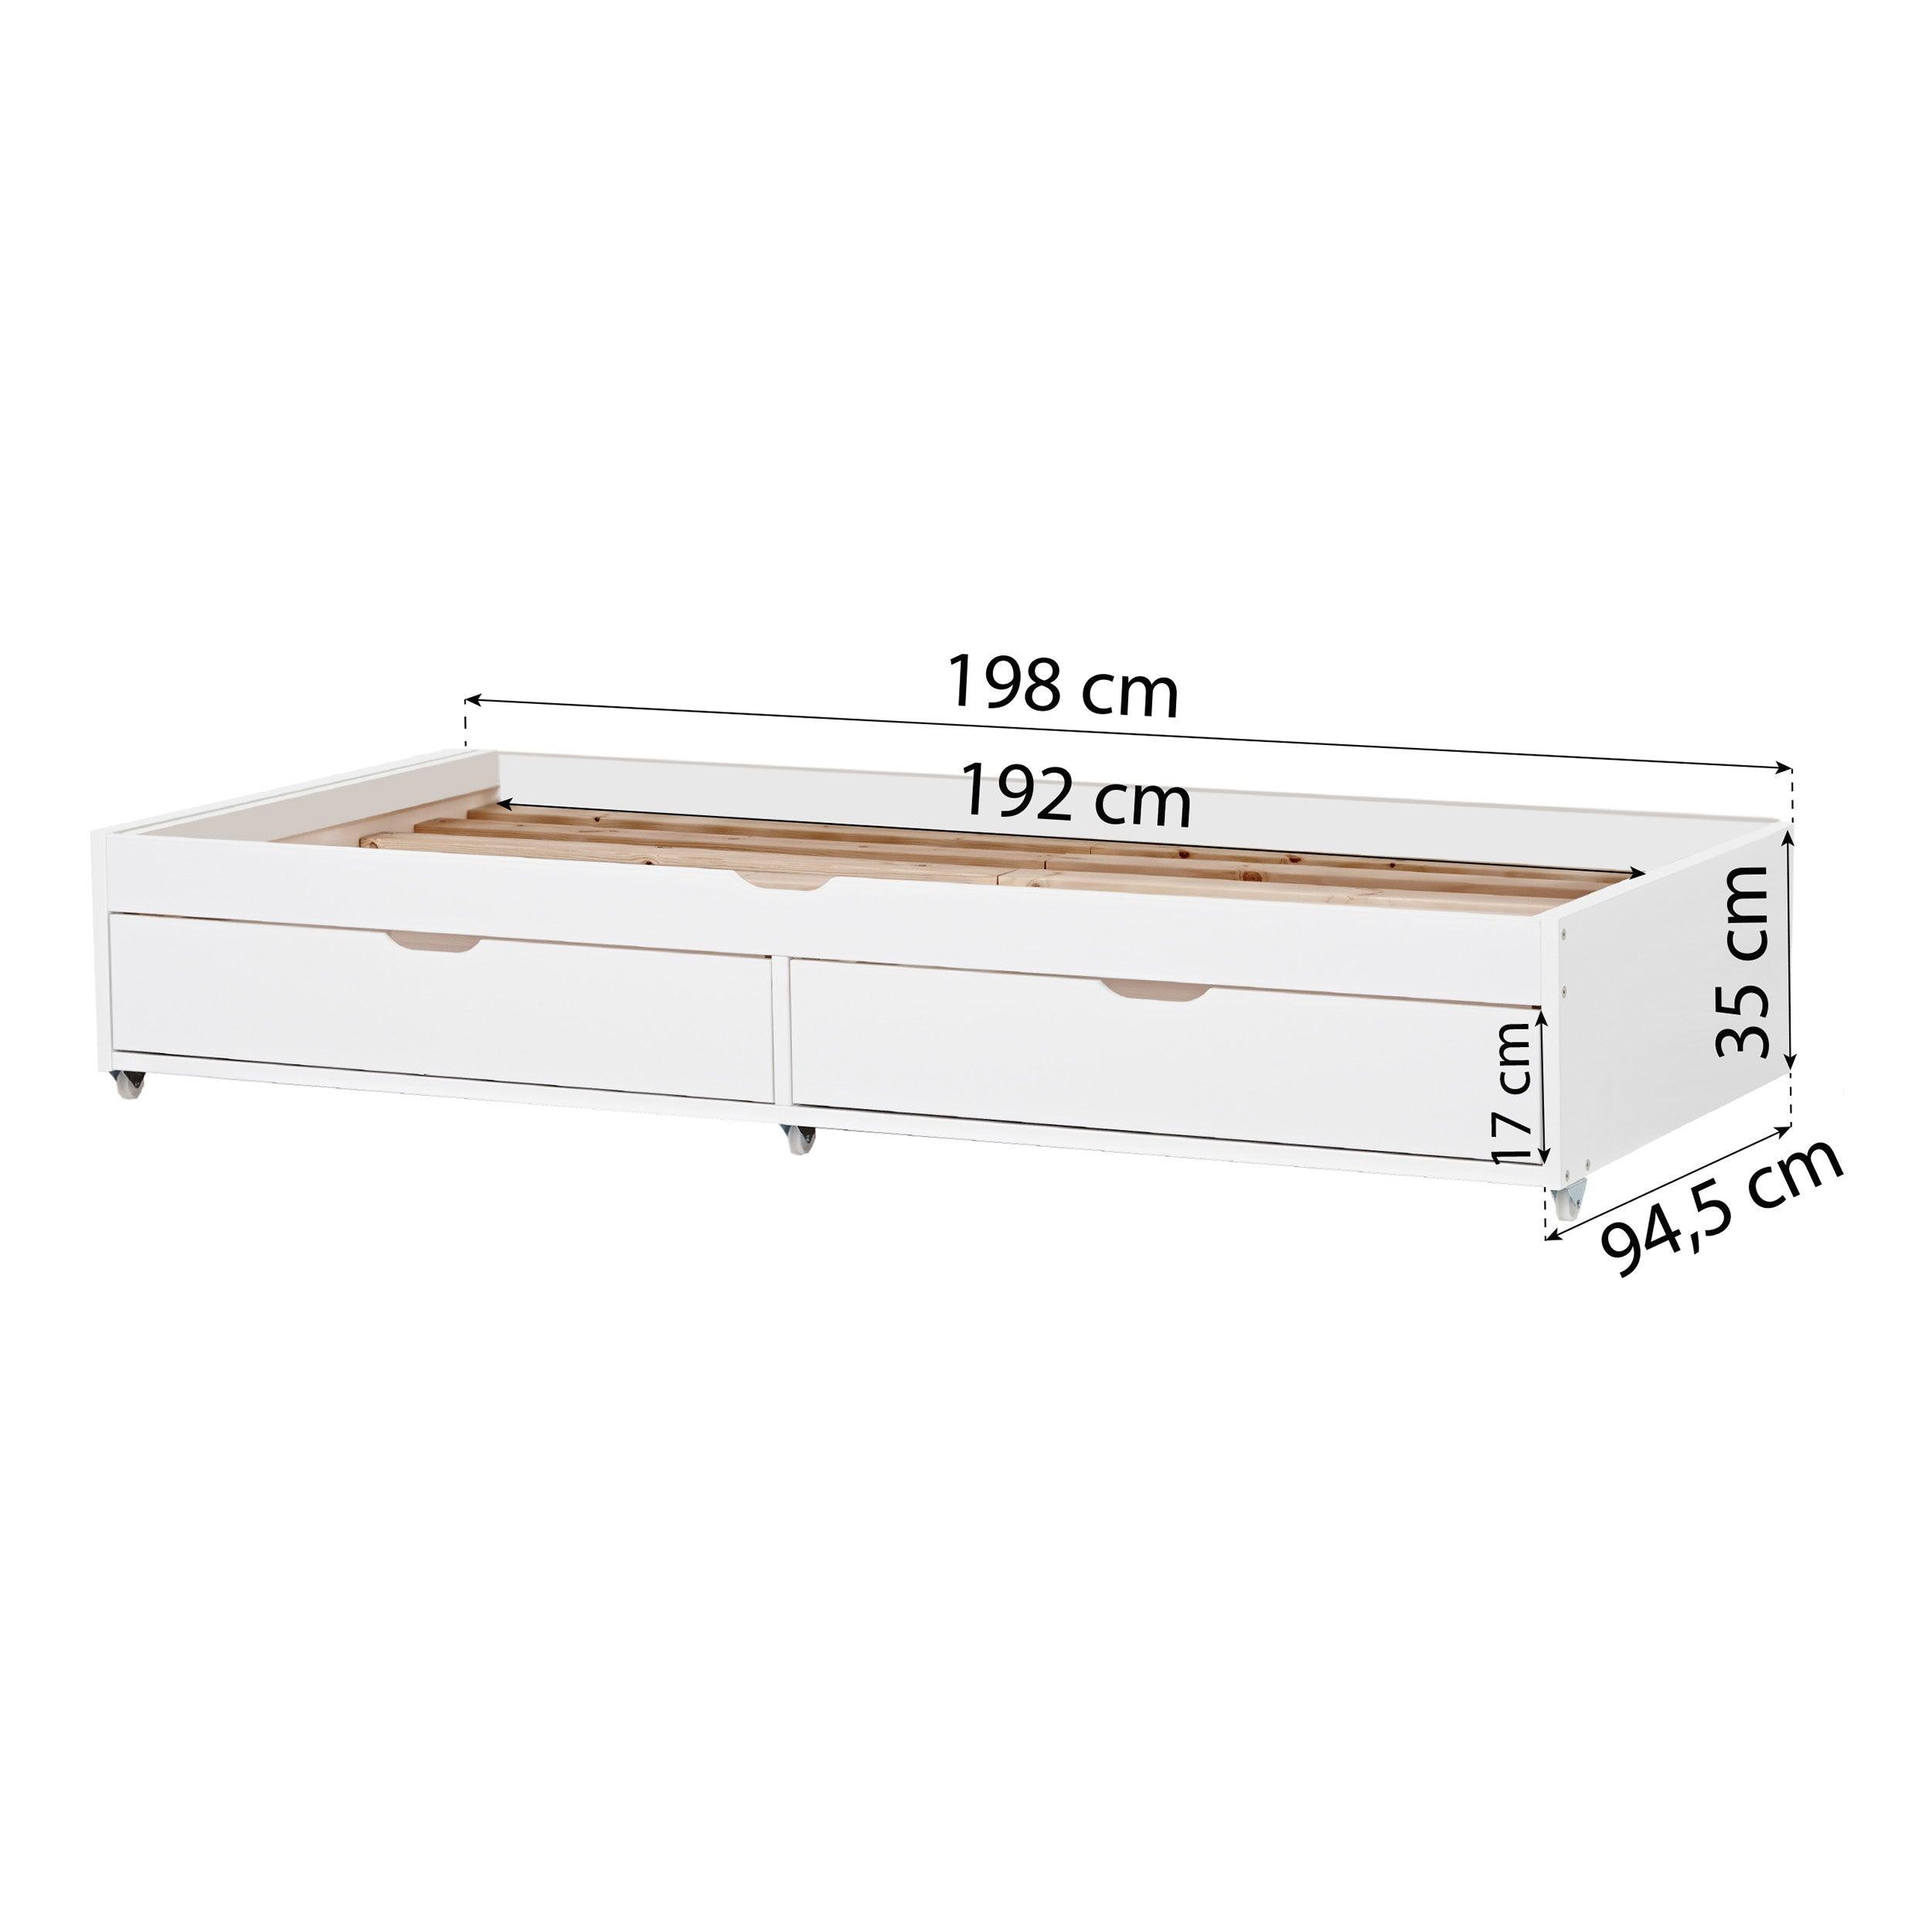 Hoppekids DELUXE 90x190 cm pull-out bed, White